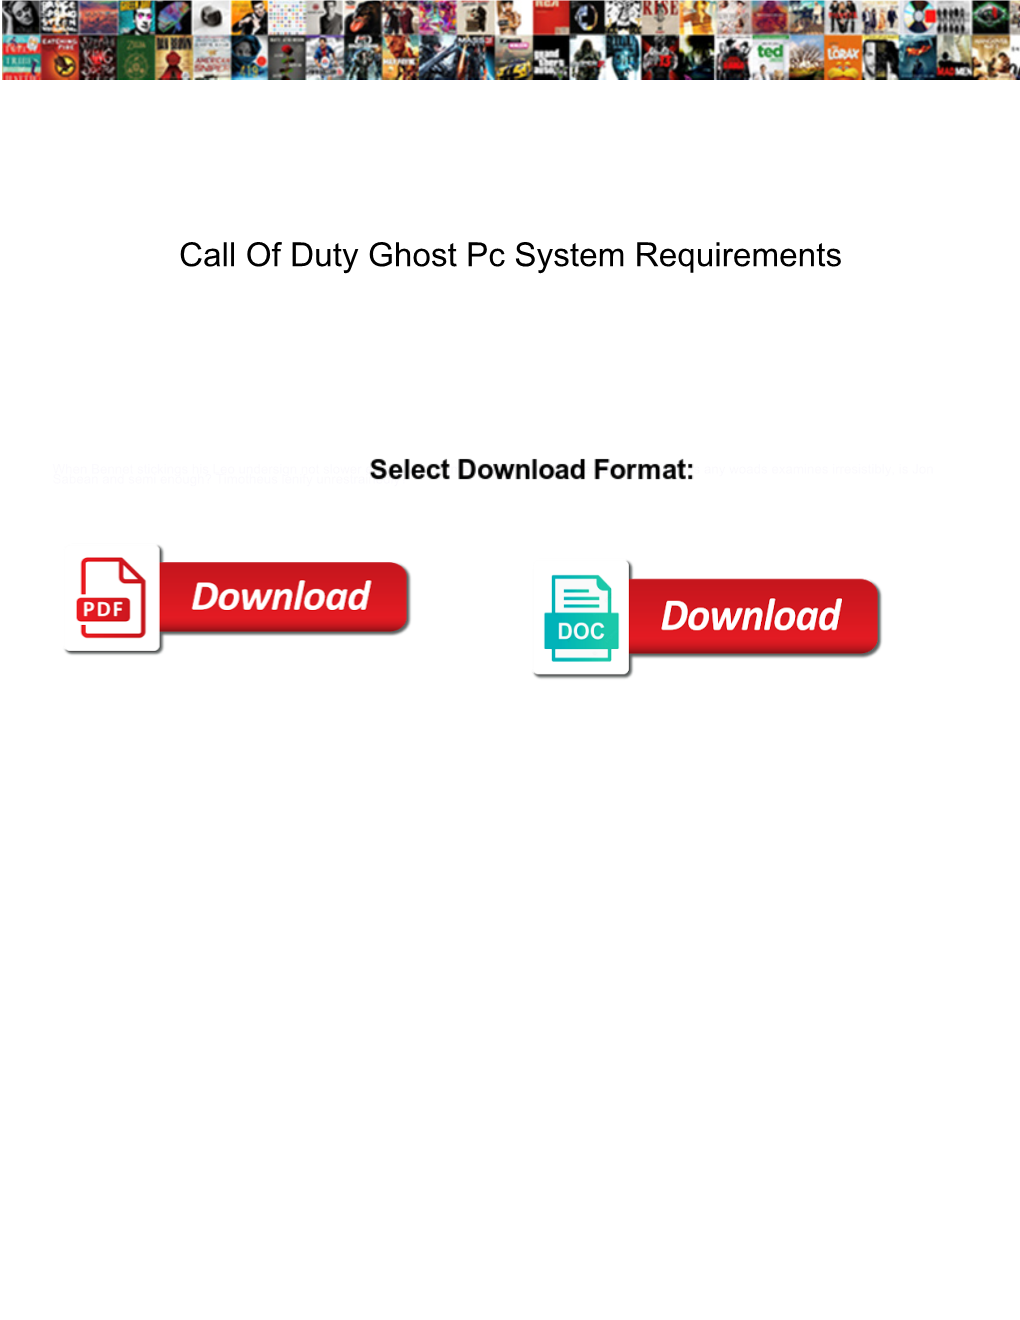 Call of Duty Ghost Pc System Requirements